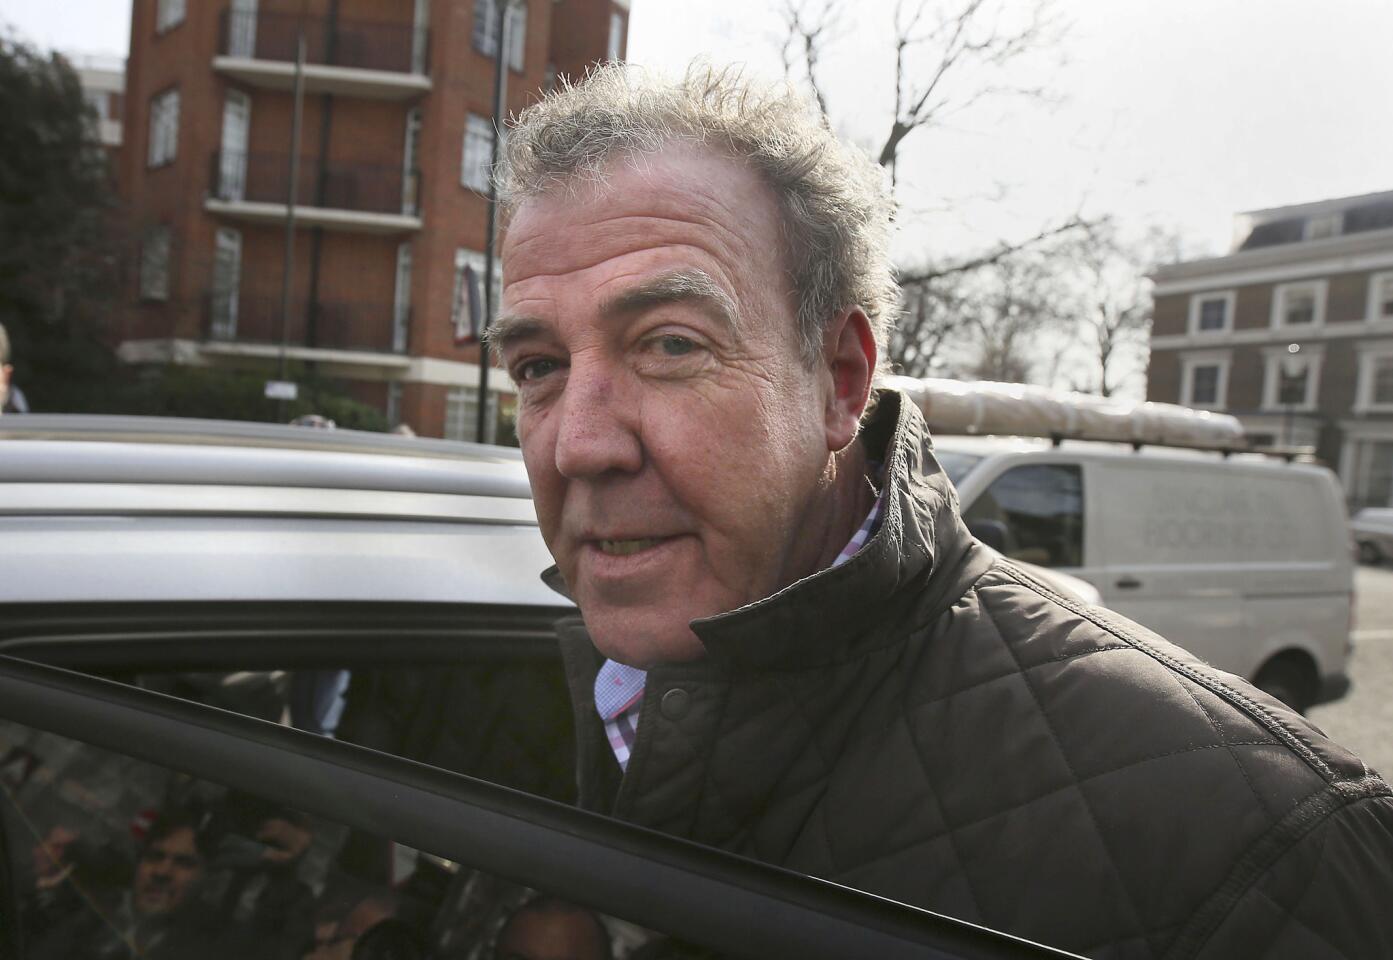 "Top Gear" host Jeremy Clarkson was abruptly suspended in March after an unspecified "fracas" that, according to reports, involved fisticuffs with one of his producers.